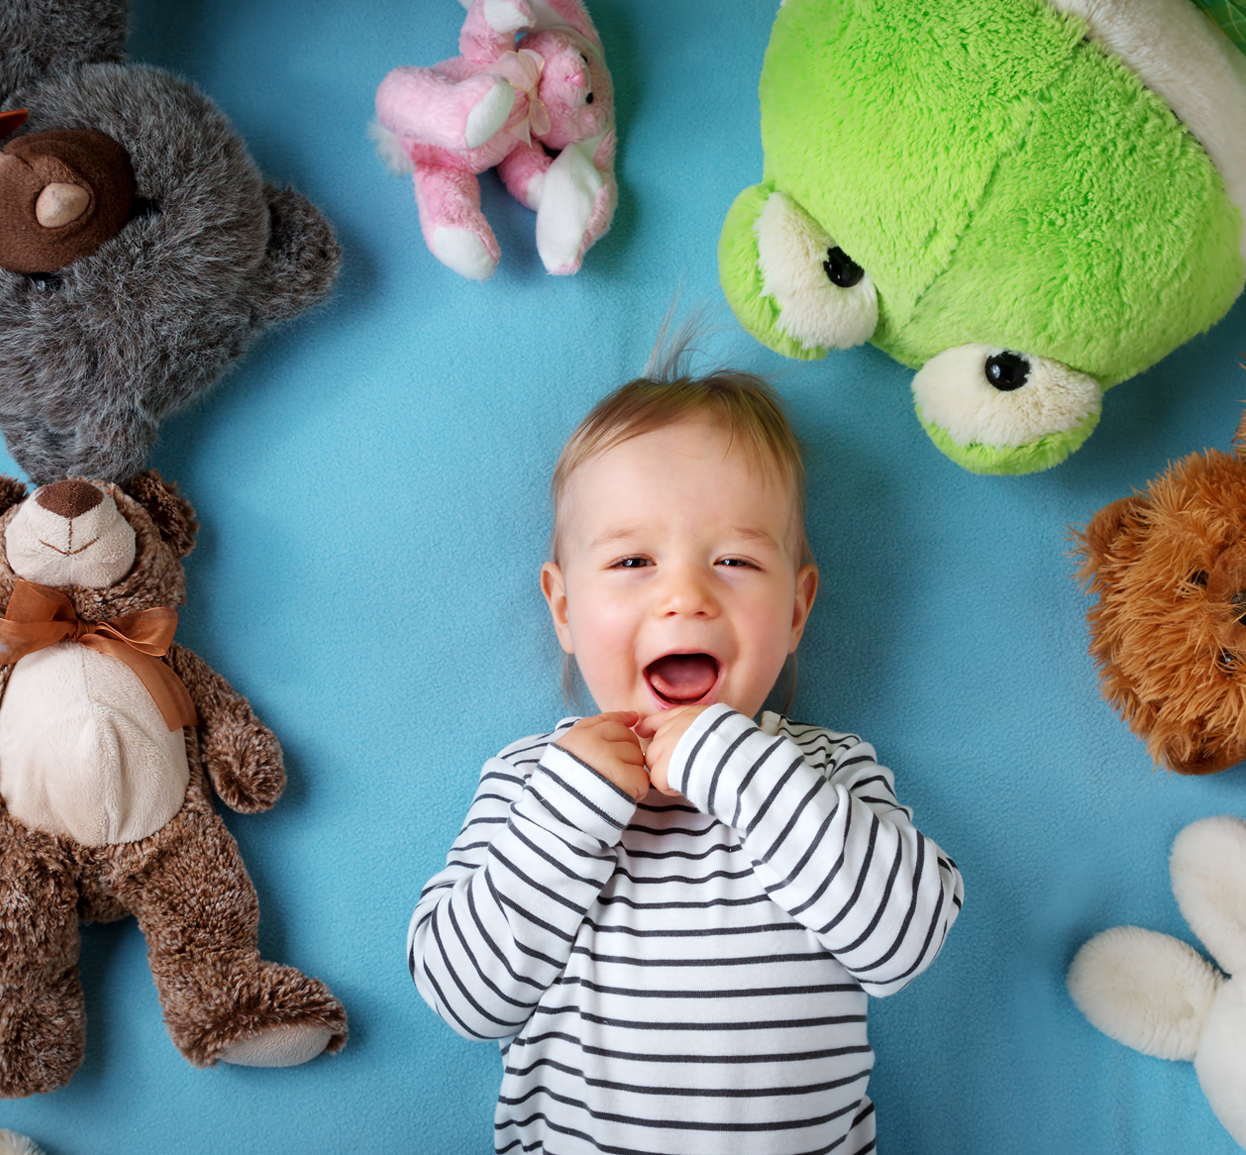 image of pediatric patient surrounded by stuffed animals